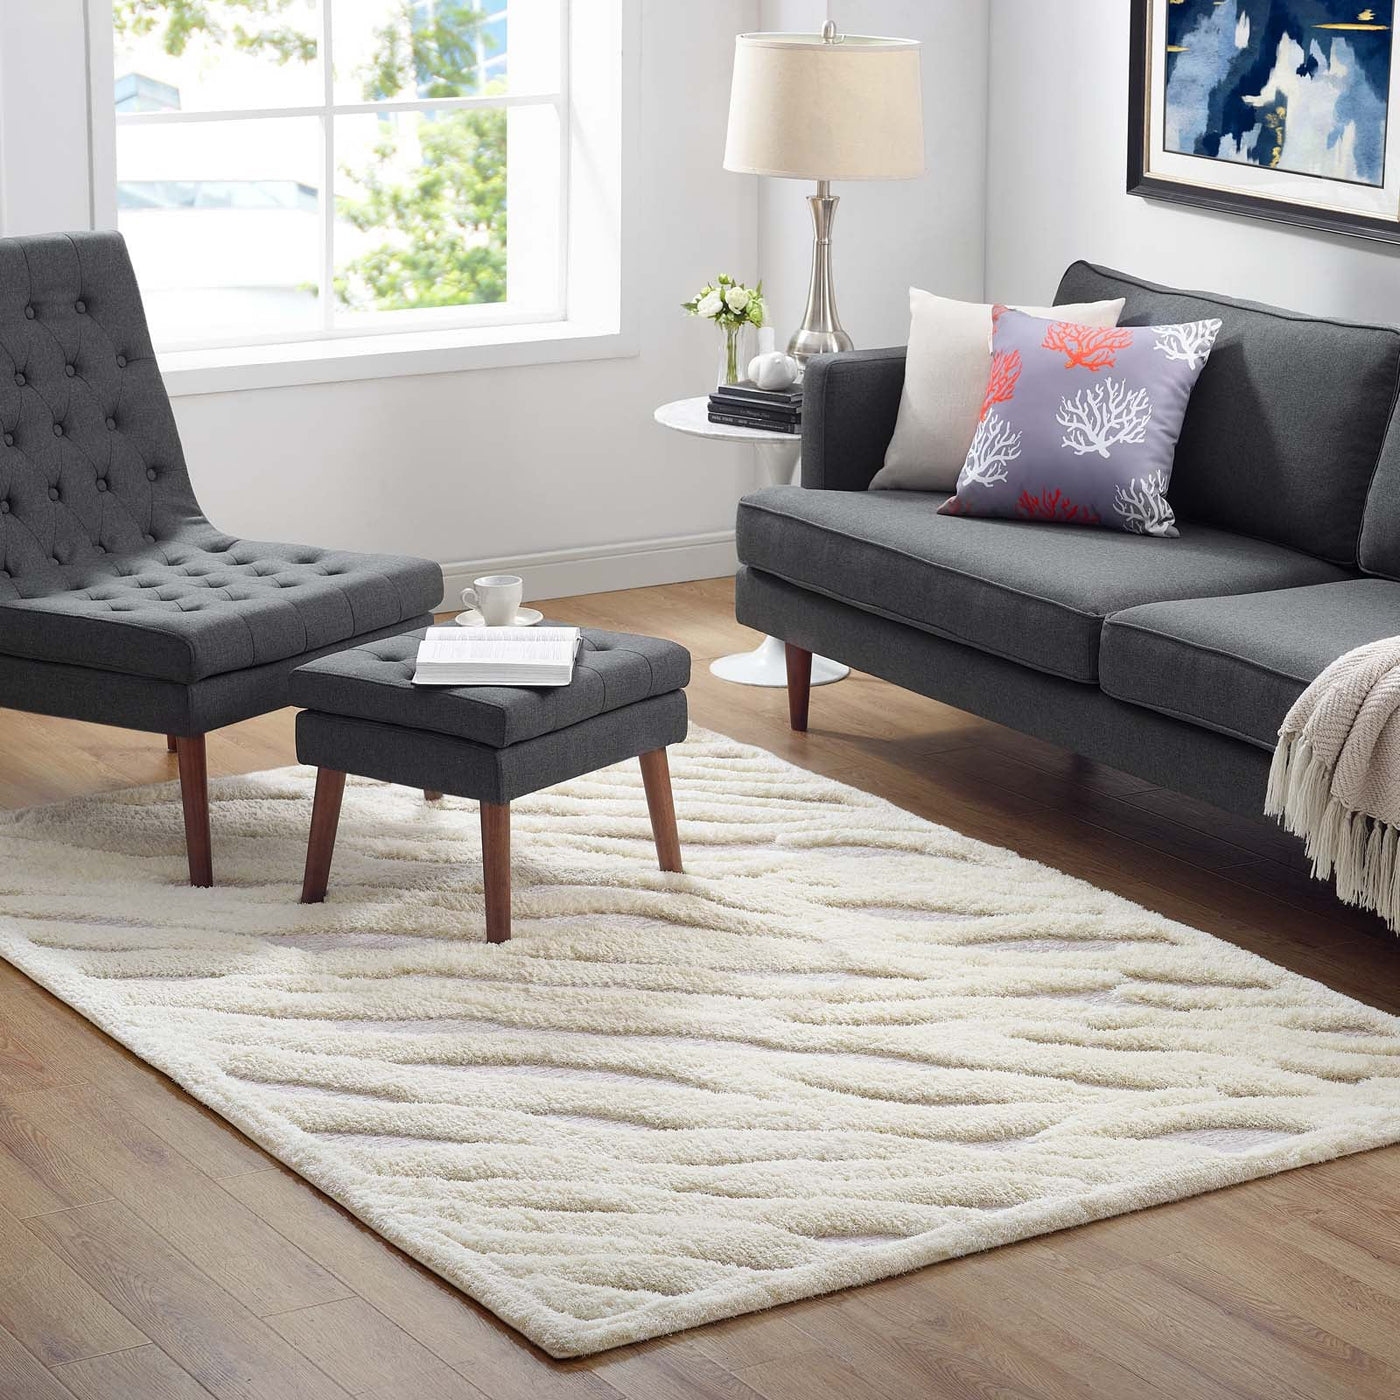 Whimsical Current Abstract Wavy Striped Shag Area Rug